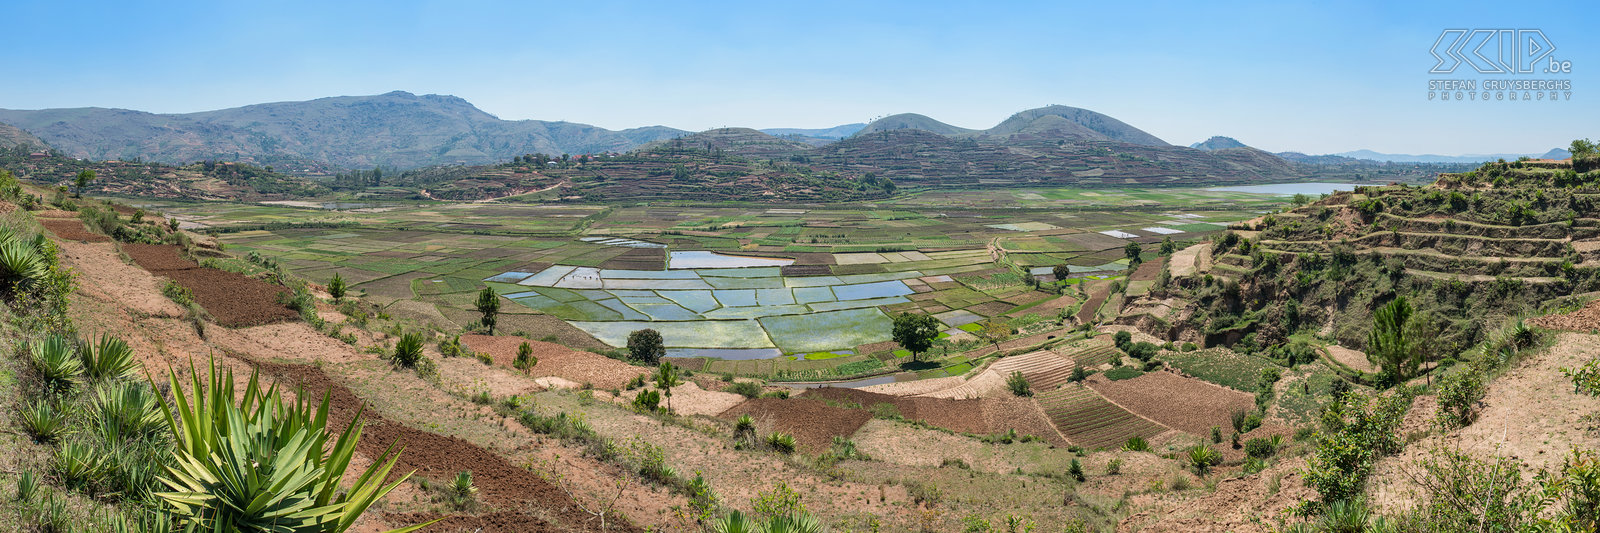 Befato - Rice paddies The region around the city Antsirabe is situated at an altitude of about 1200m to 1600m making its climate subtropical highland. This is perfect for farming and in the region is full of terraces and paddy fields with rice and vegetables. Stefan Cruysberghs